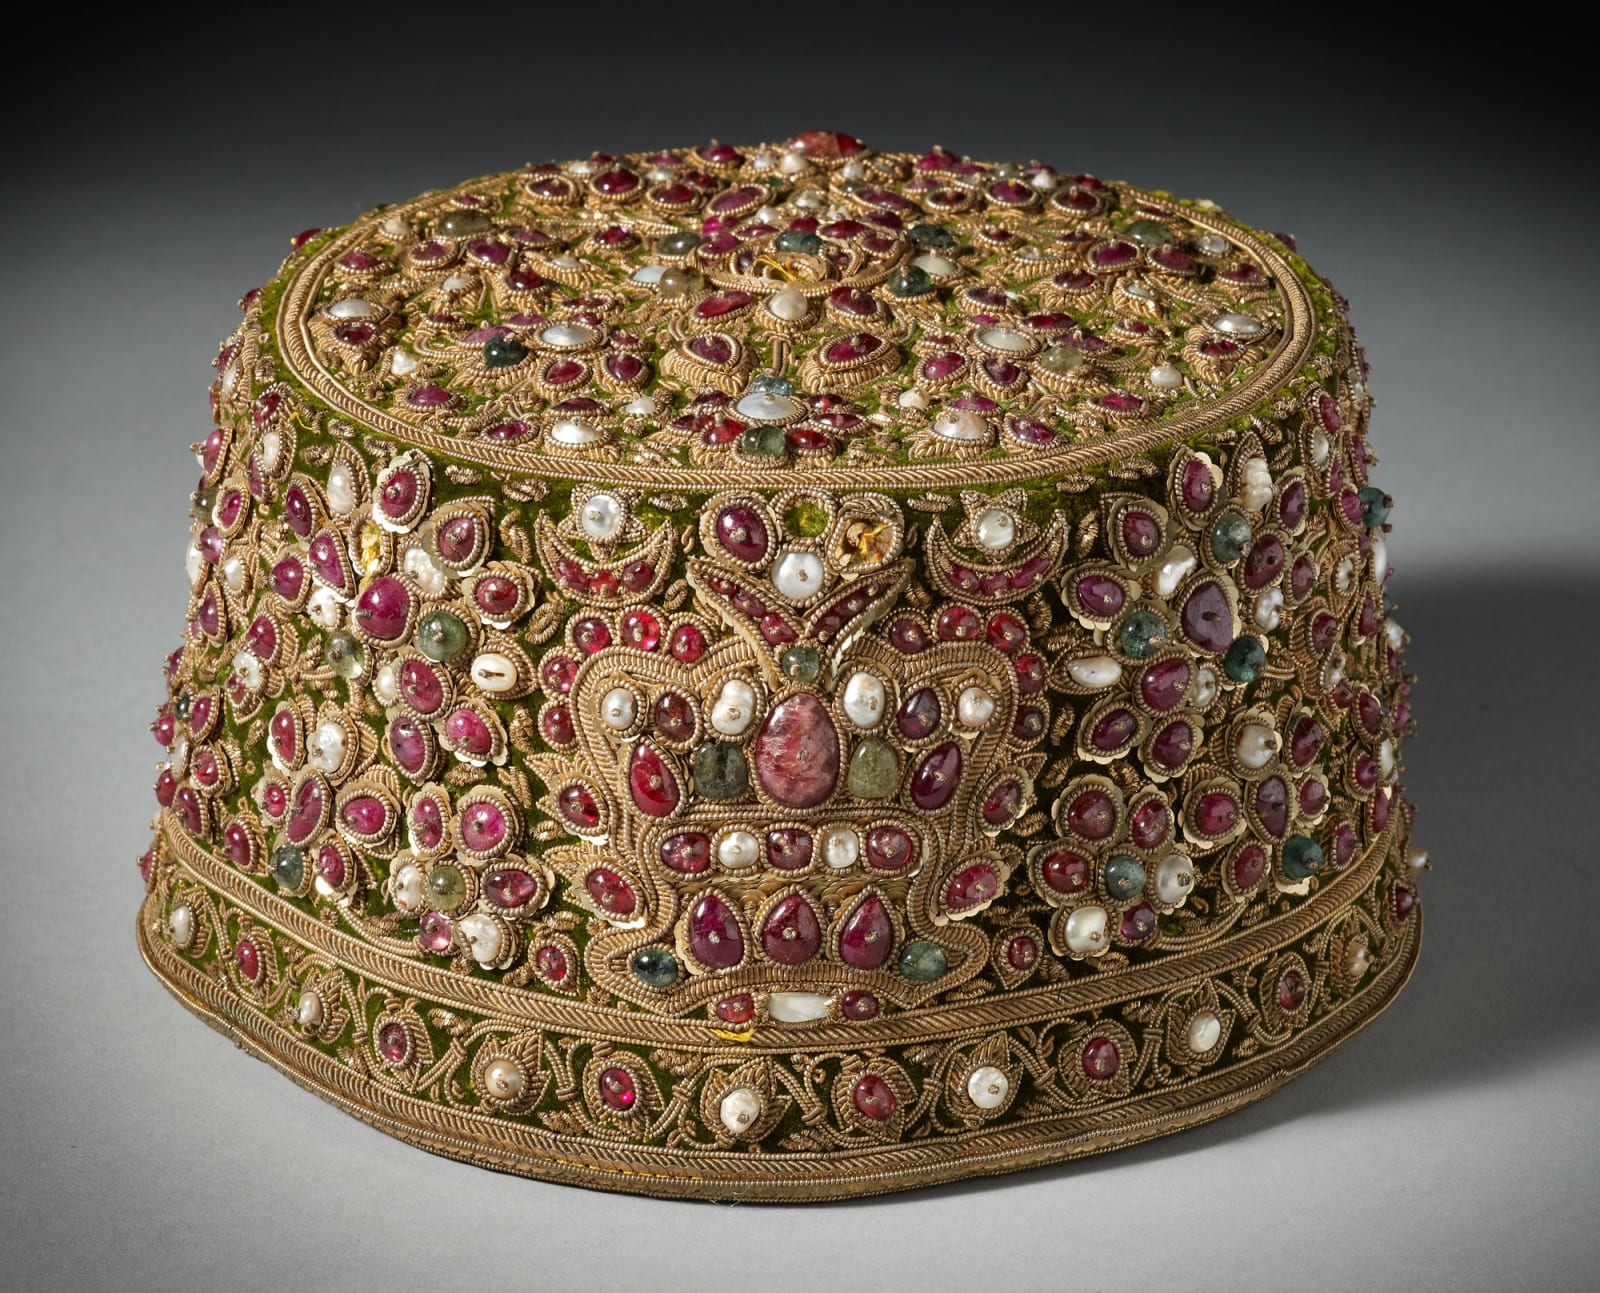 Jewel encrusted Muslim Royal Cap, Mughal style, made by Ezra & Sion Co, Bombay, early 20th century